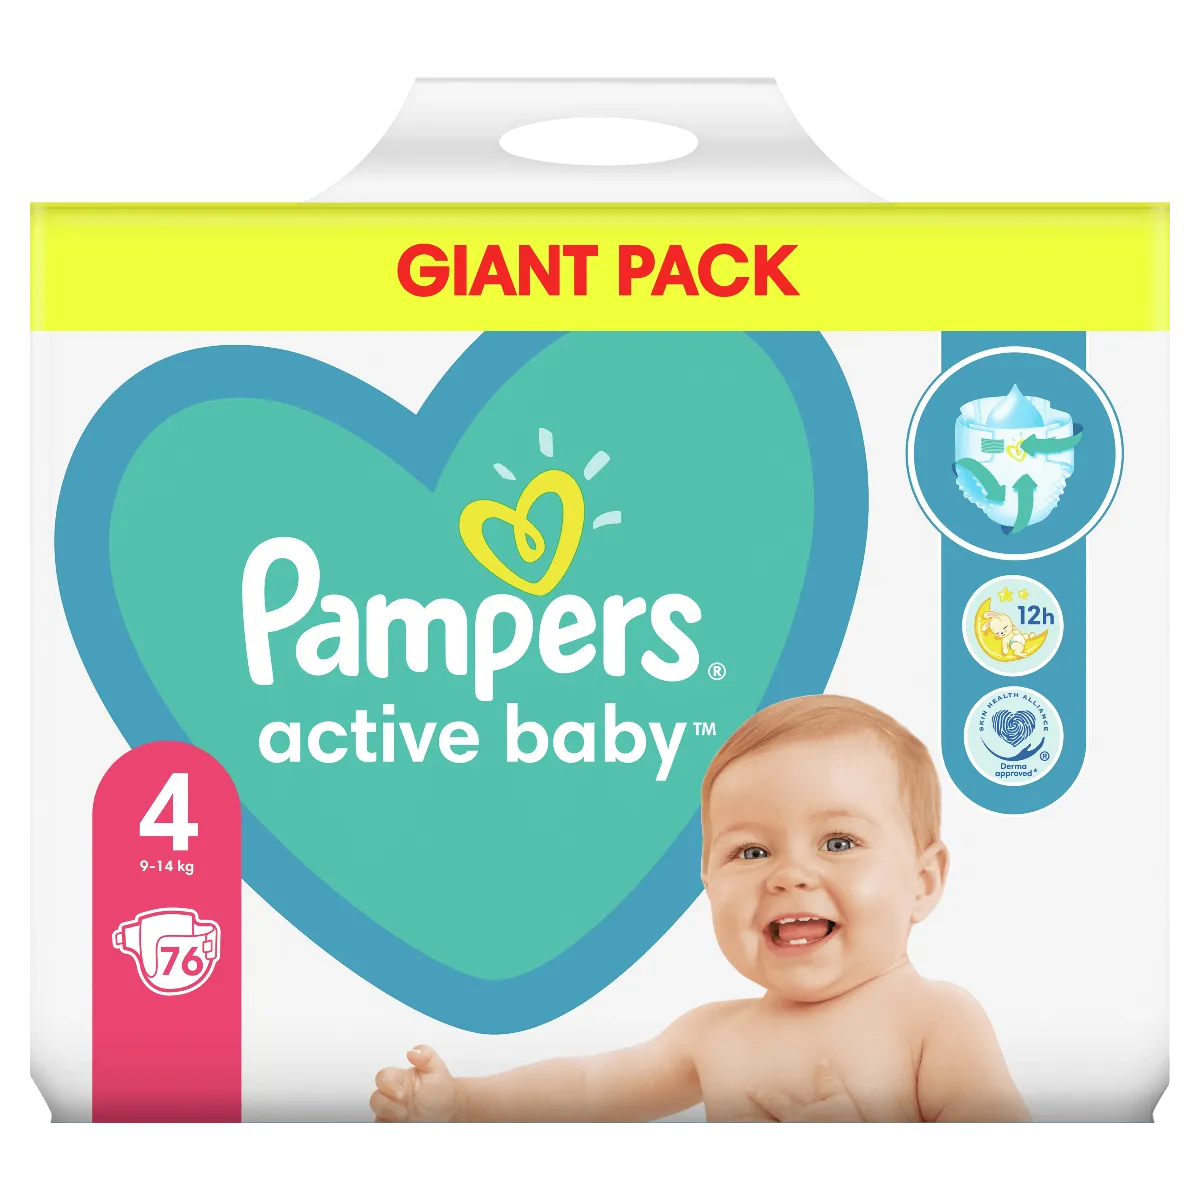 pampers 3 site ceneo.pl